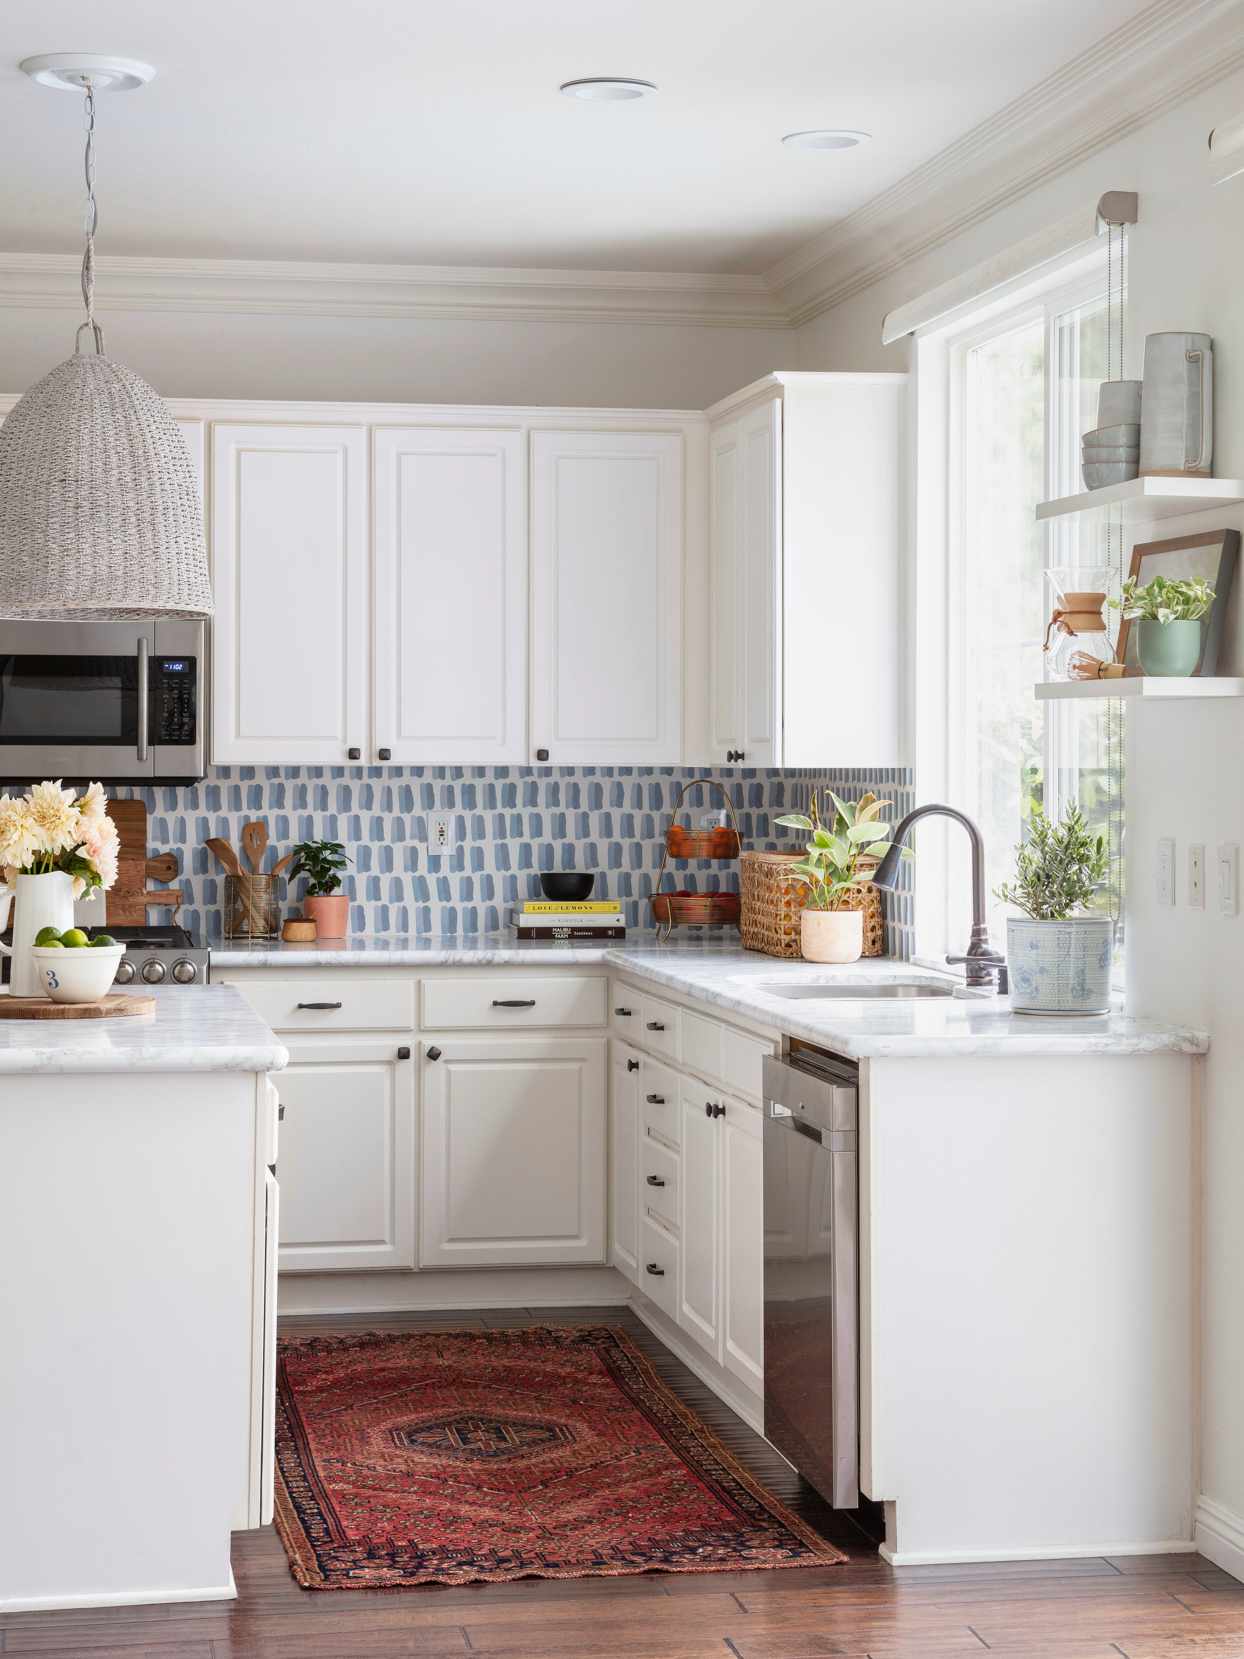 20 Small Kitchen Decor Ideas to Make a Sizzling Statement   Better ...